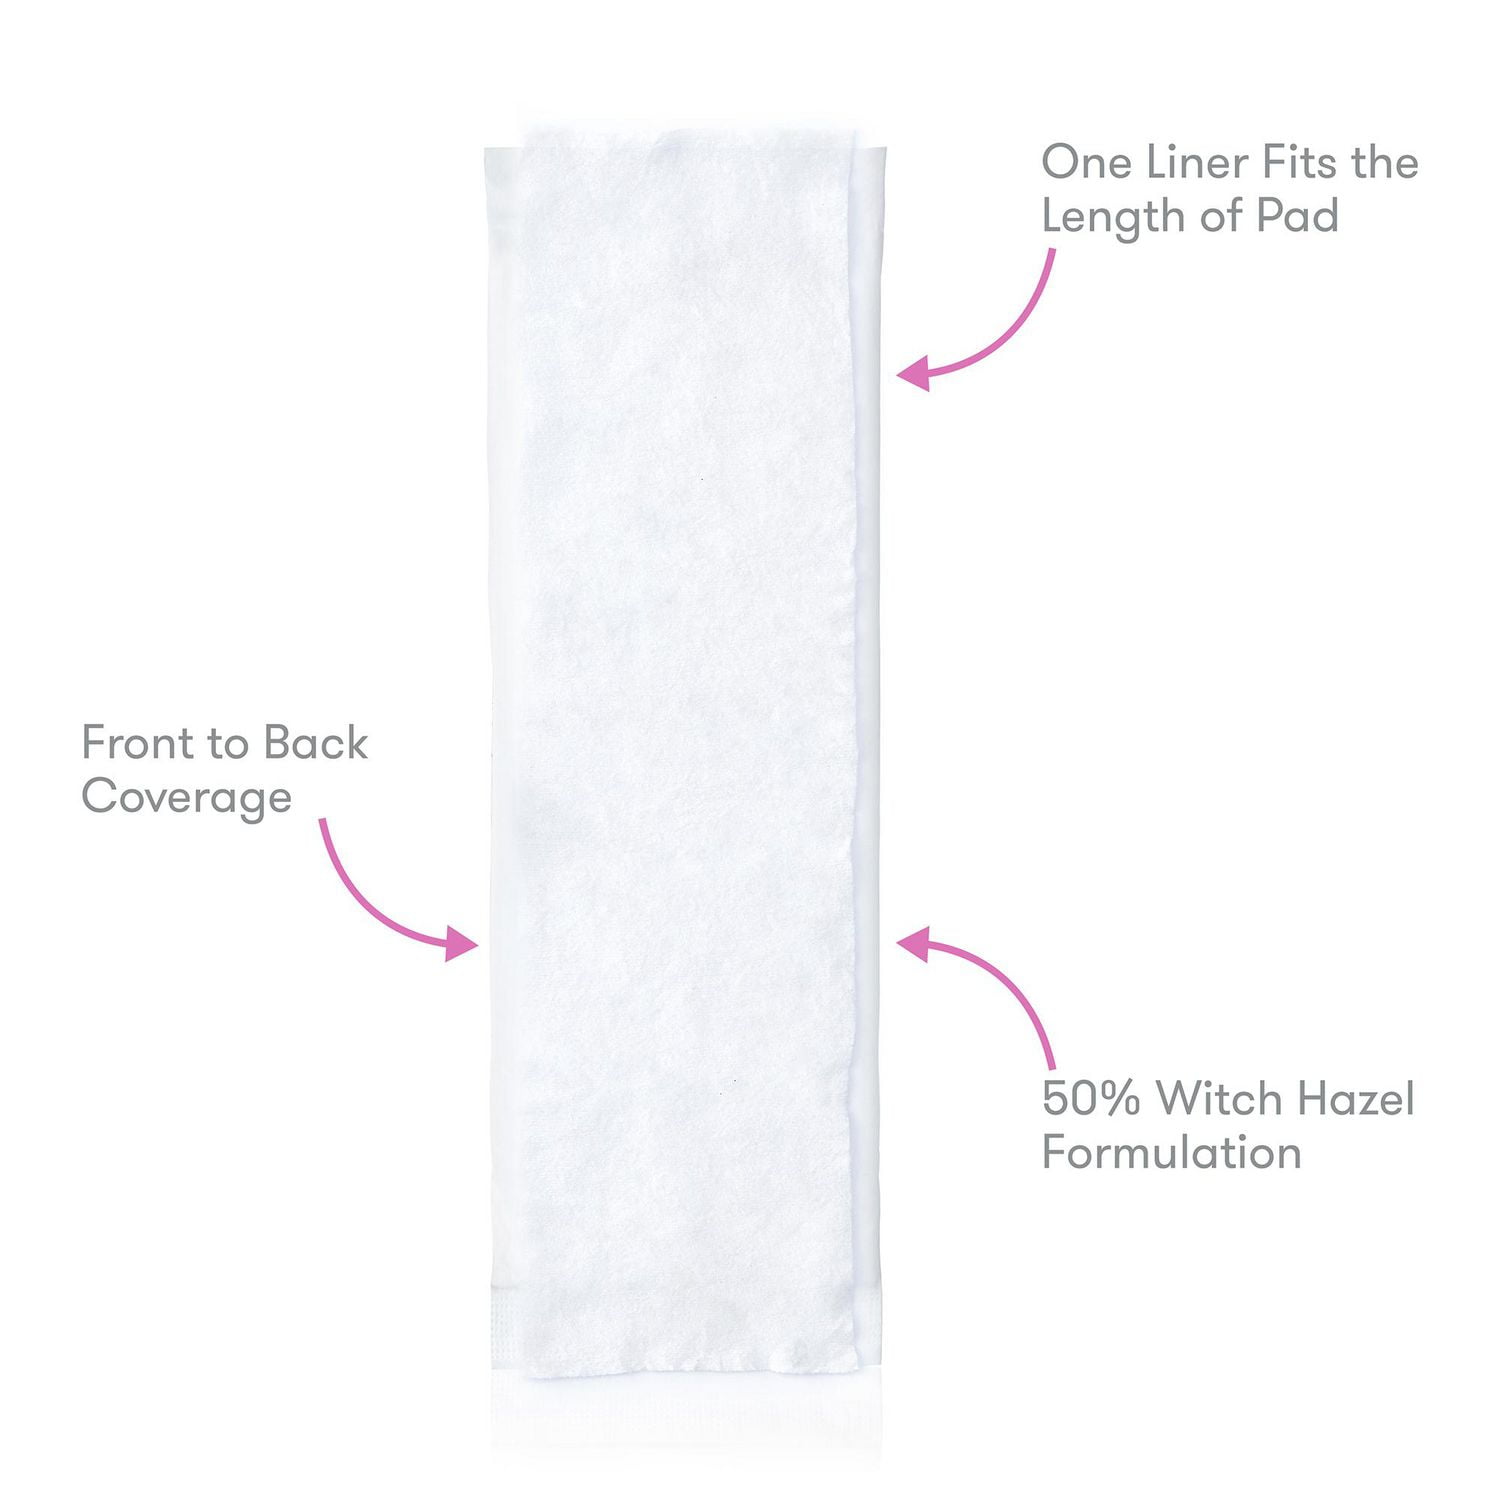 Reusable Perineal Cooling Pad for Postpartum & Nepal